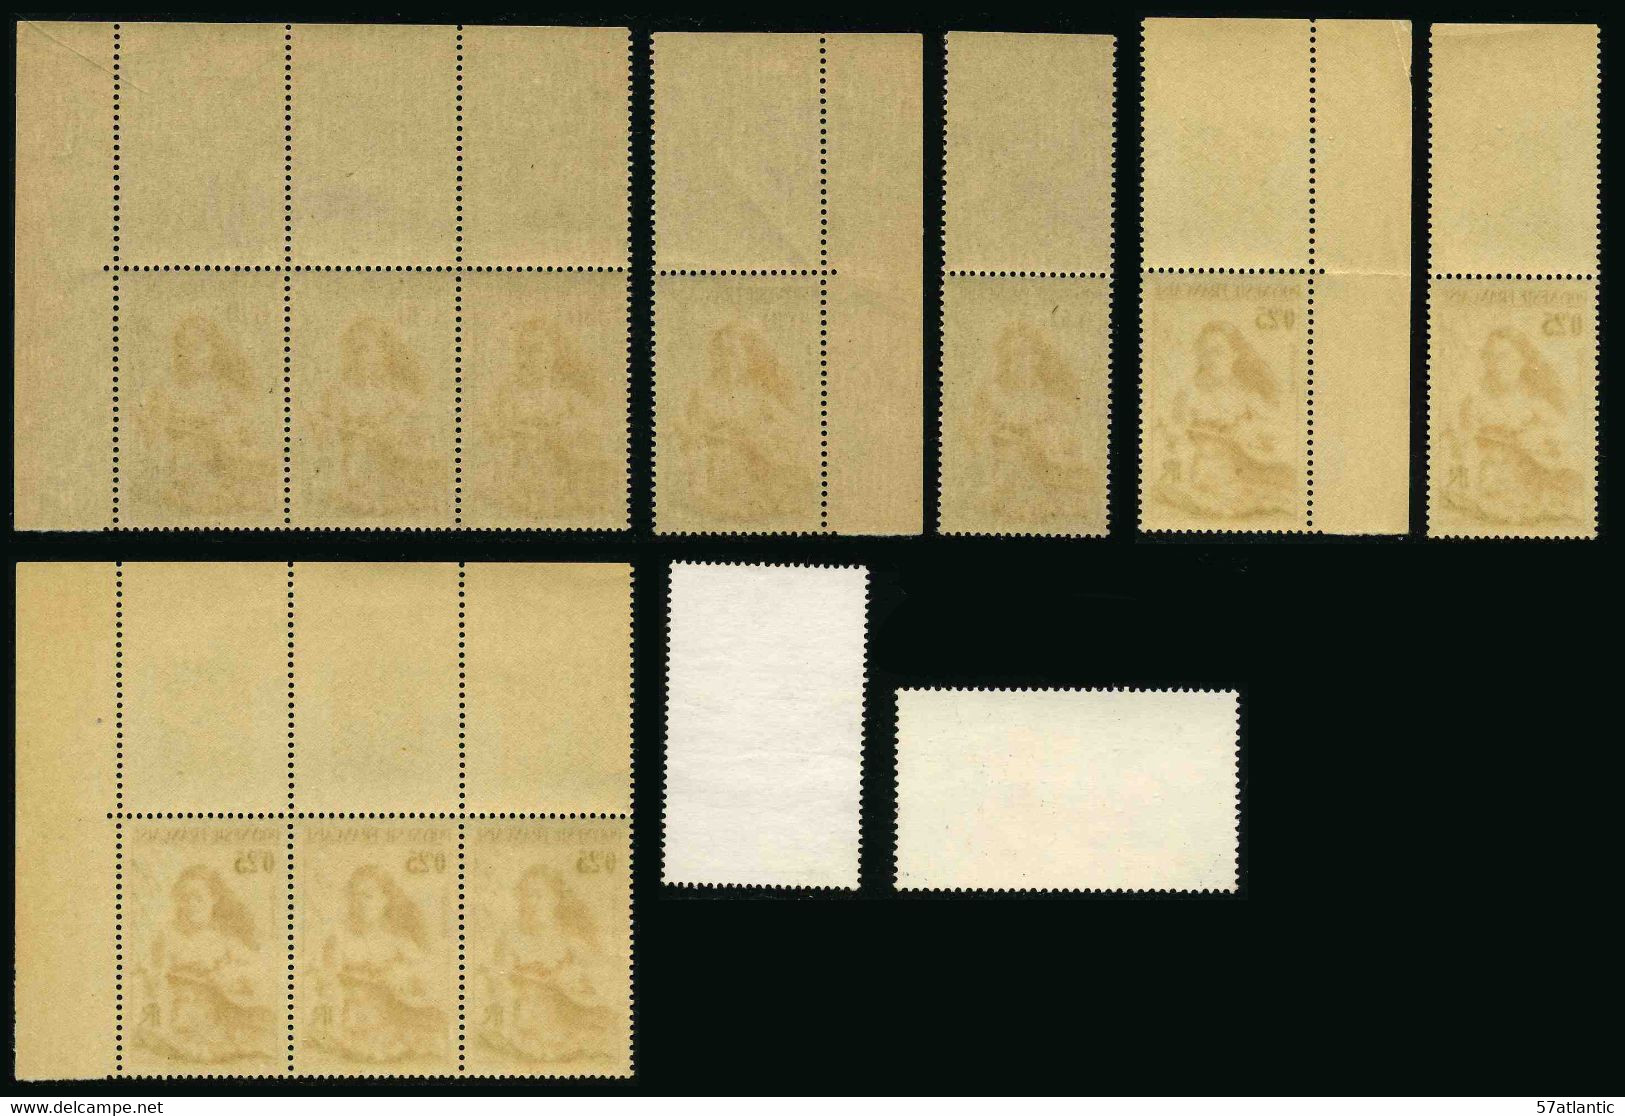 POLYNESIE FRANCAISE - LOT DE 12 TIMBRES NEUFS ** - Collections, Lots & Series